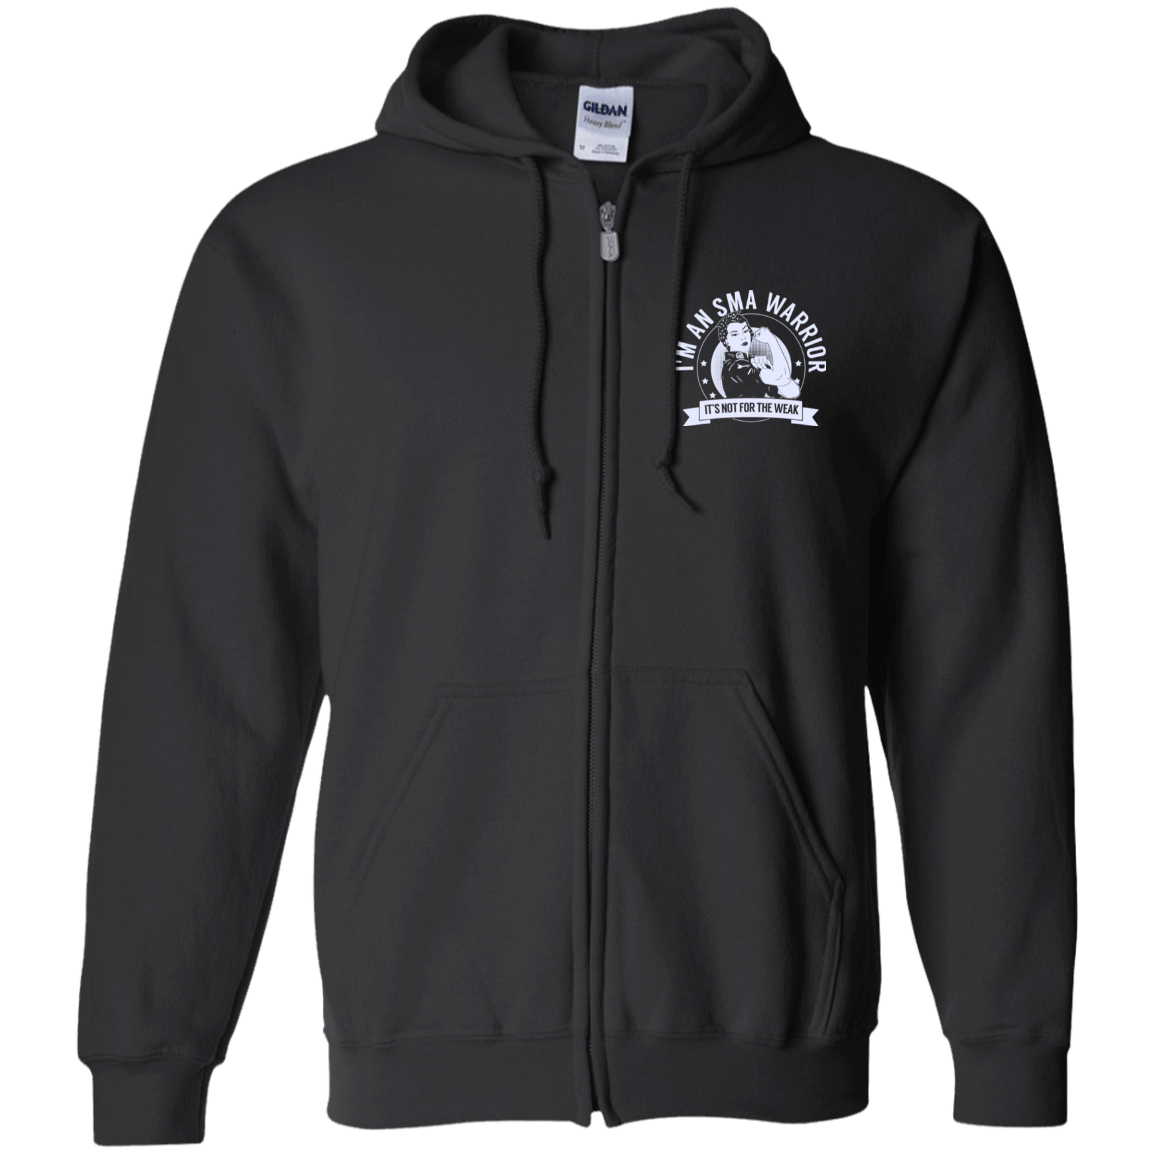 Spinal Muscular Atrophy - SMA Warrior NFTW Zip Up Hooded Sweatshirt - The Unchargeables